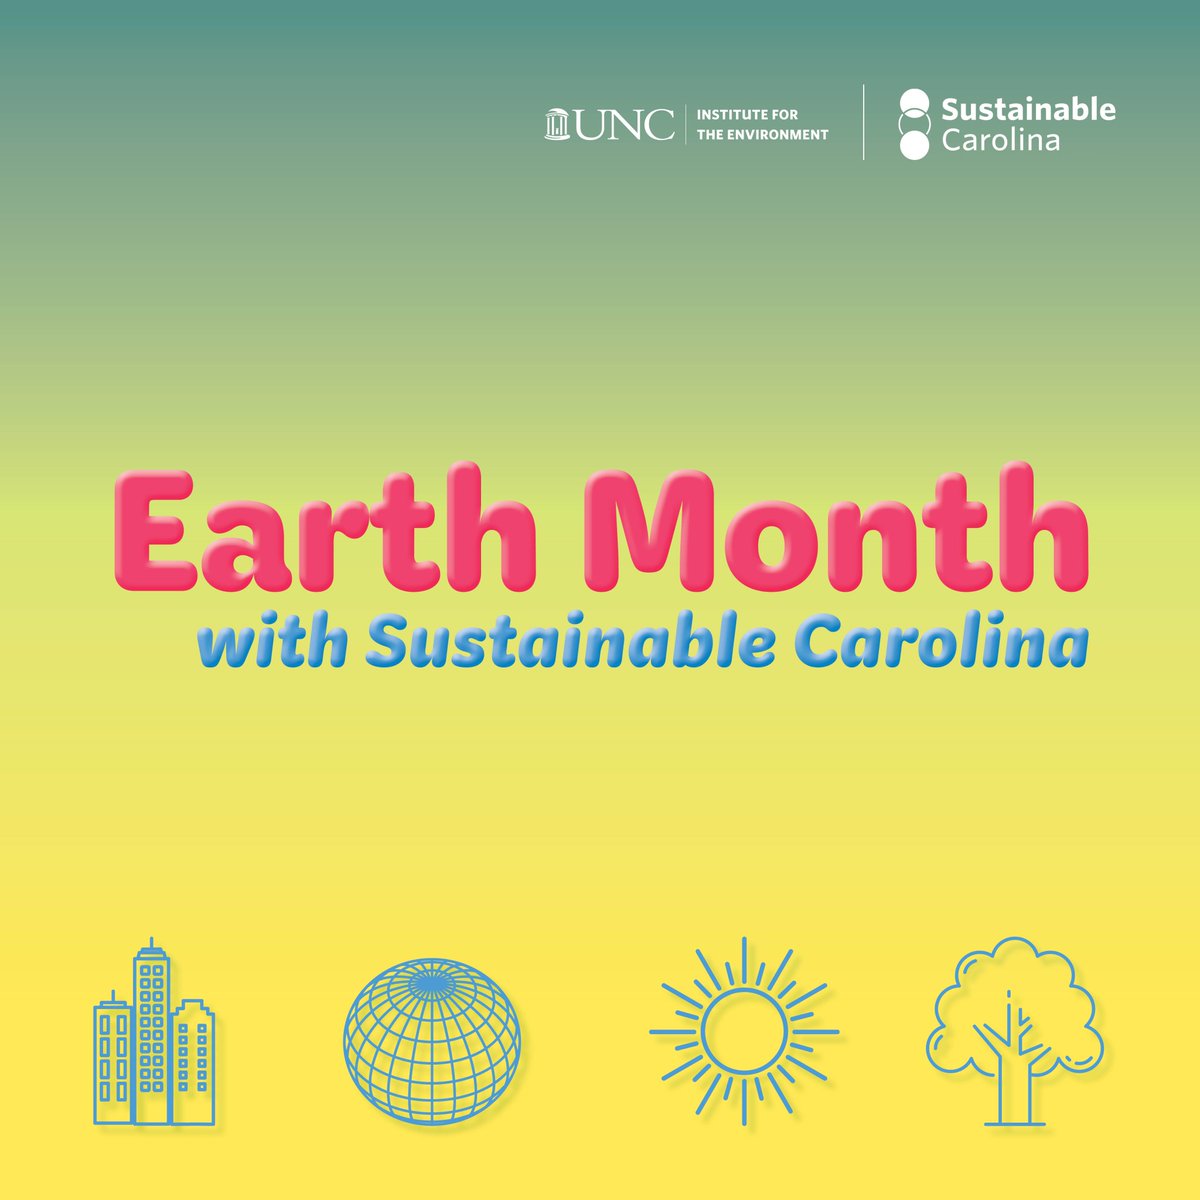 We might be biased, but April is our favorite! We're very excited to spend the month celebrating our planet with our campus partners. Learn more about the events University departments and student organizations are hosting: sustainable.unc.edu/events/earth-d…